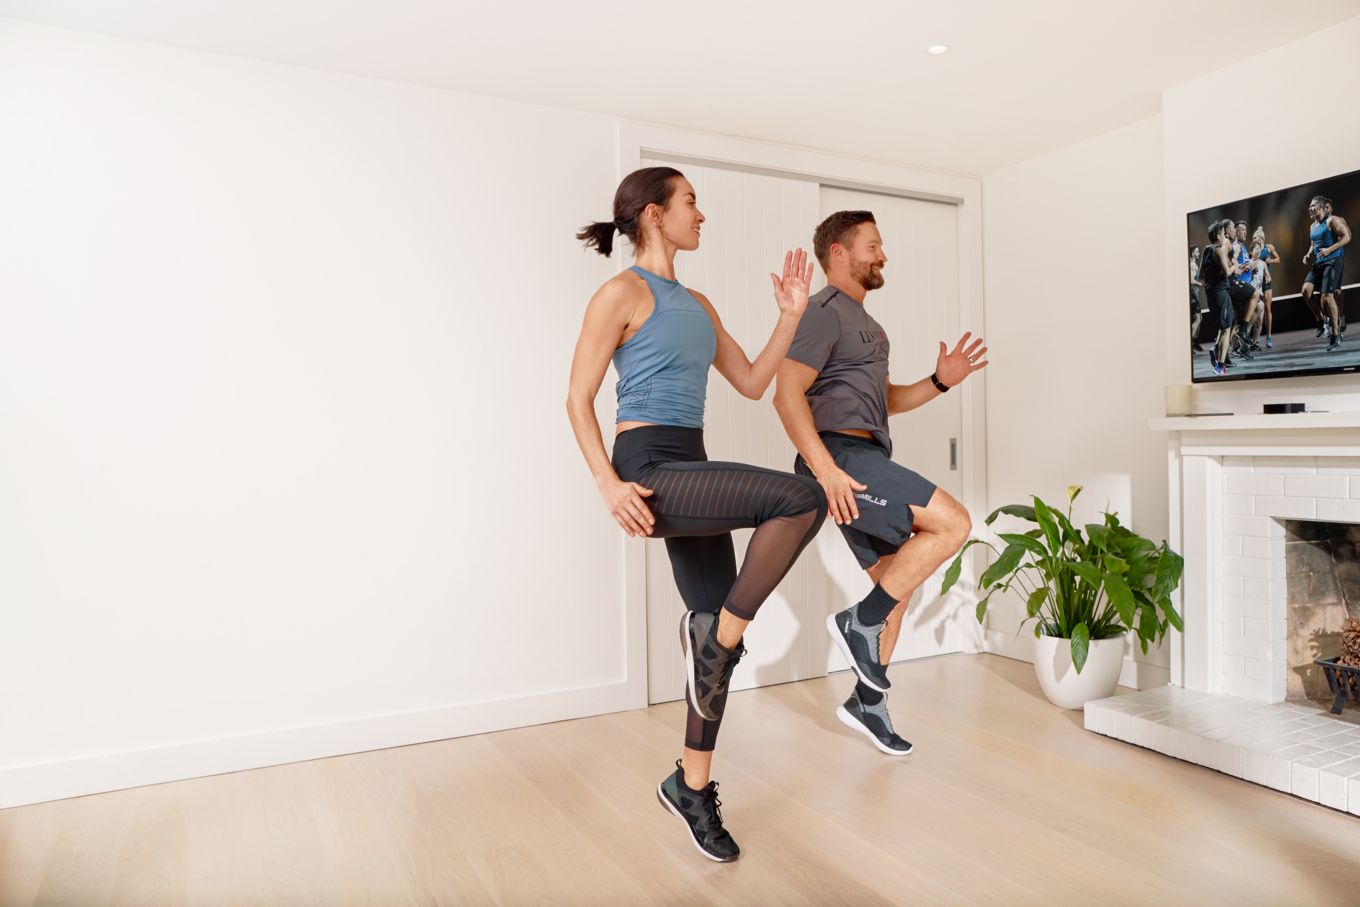 Image shows a man and a women conducting a home workout.